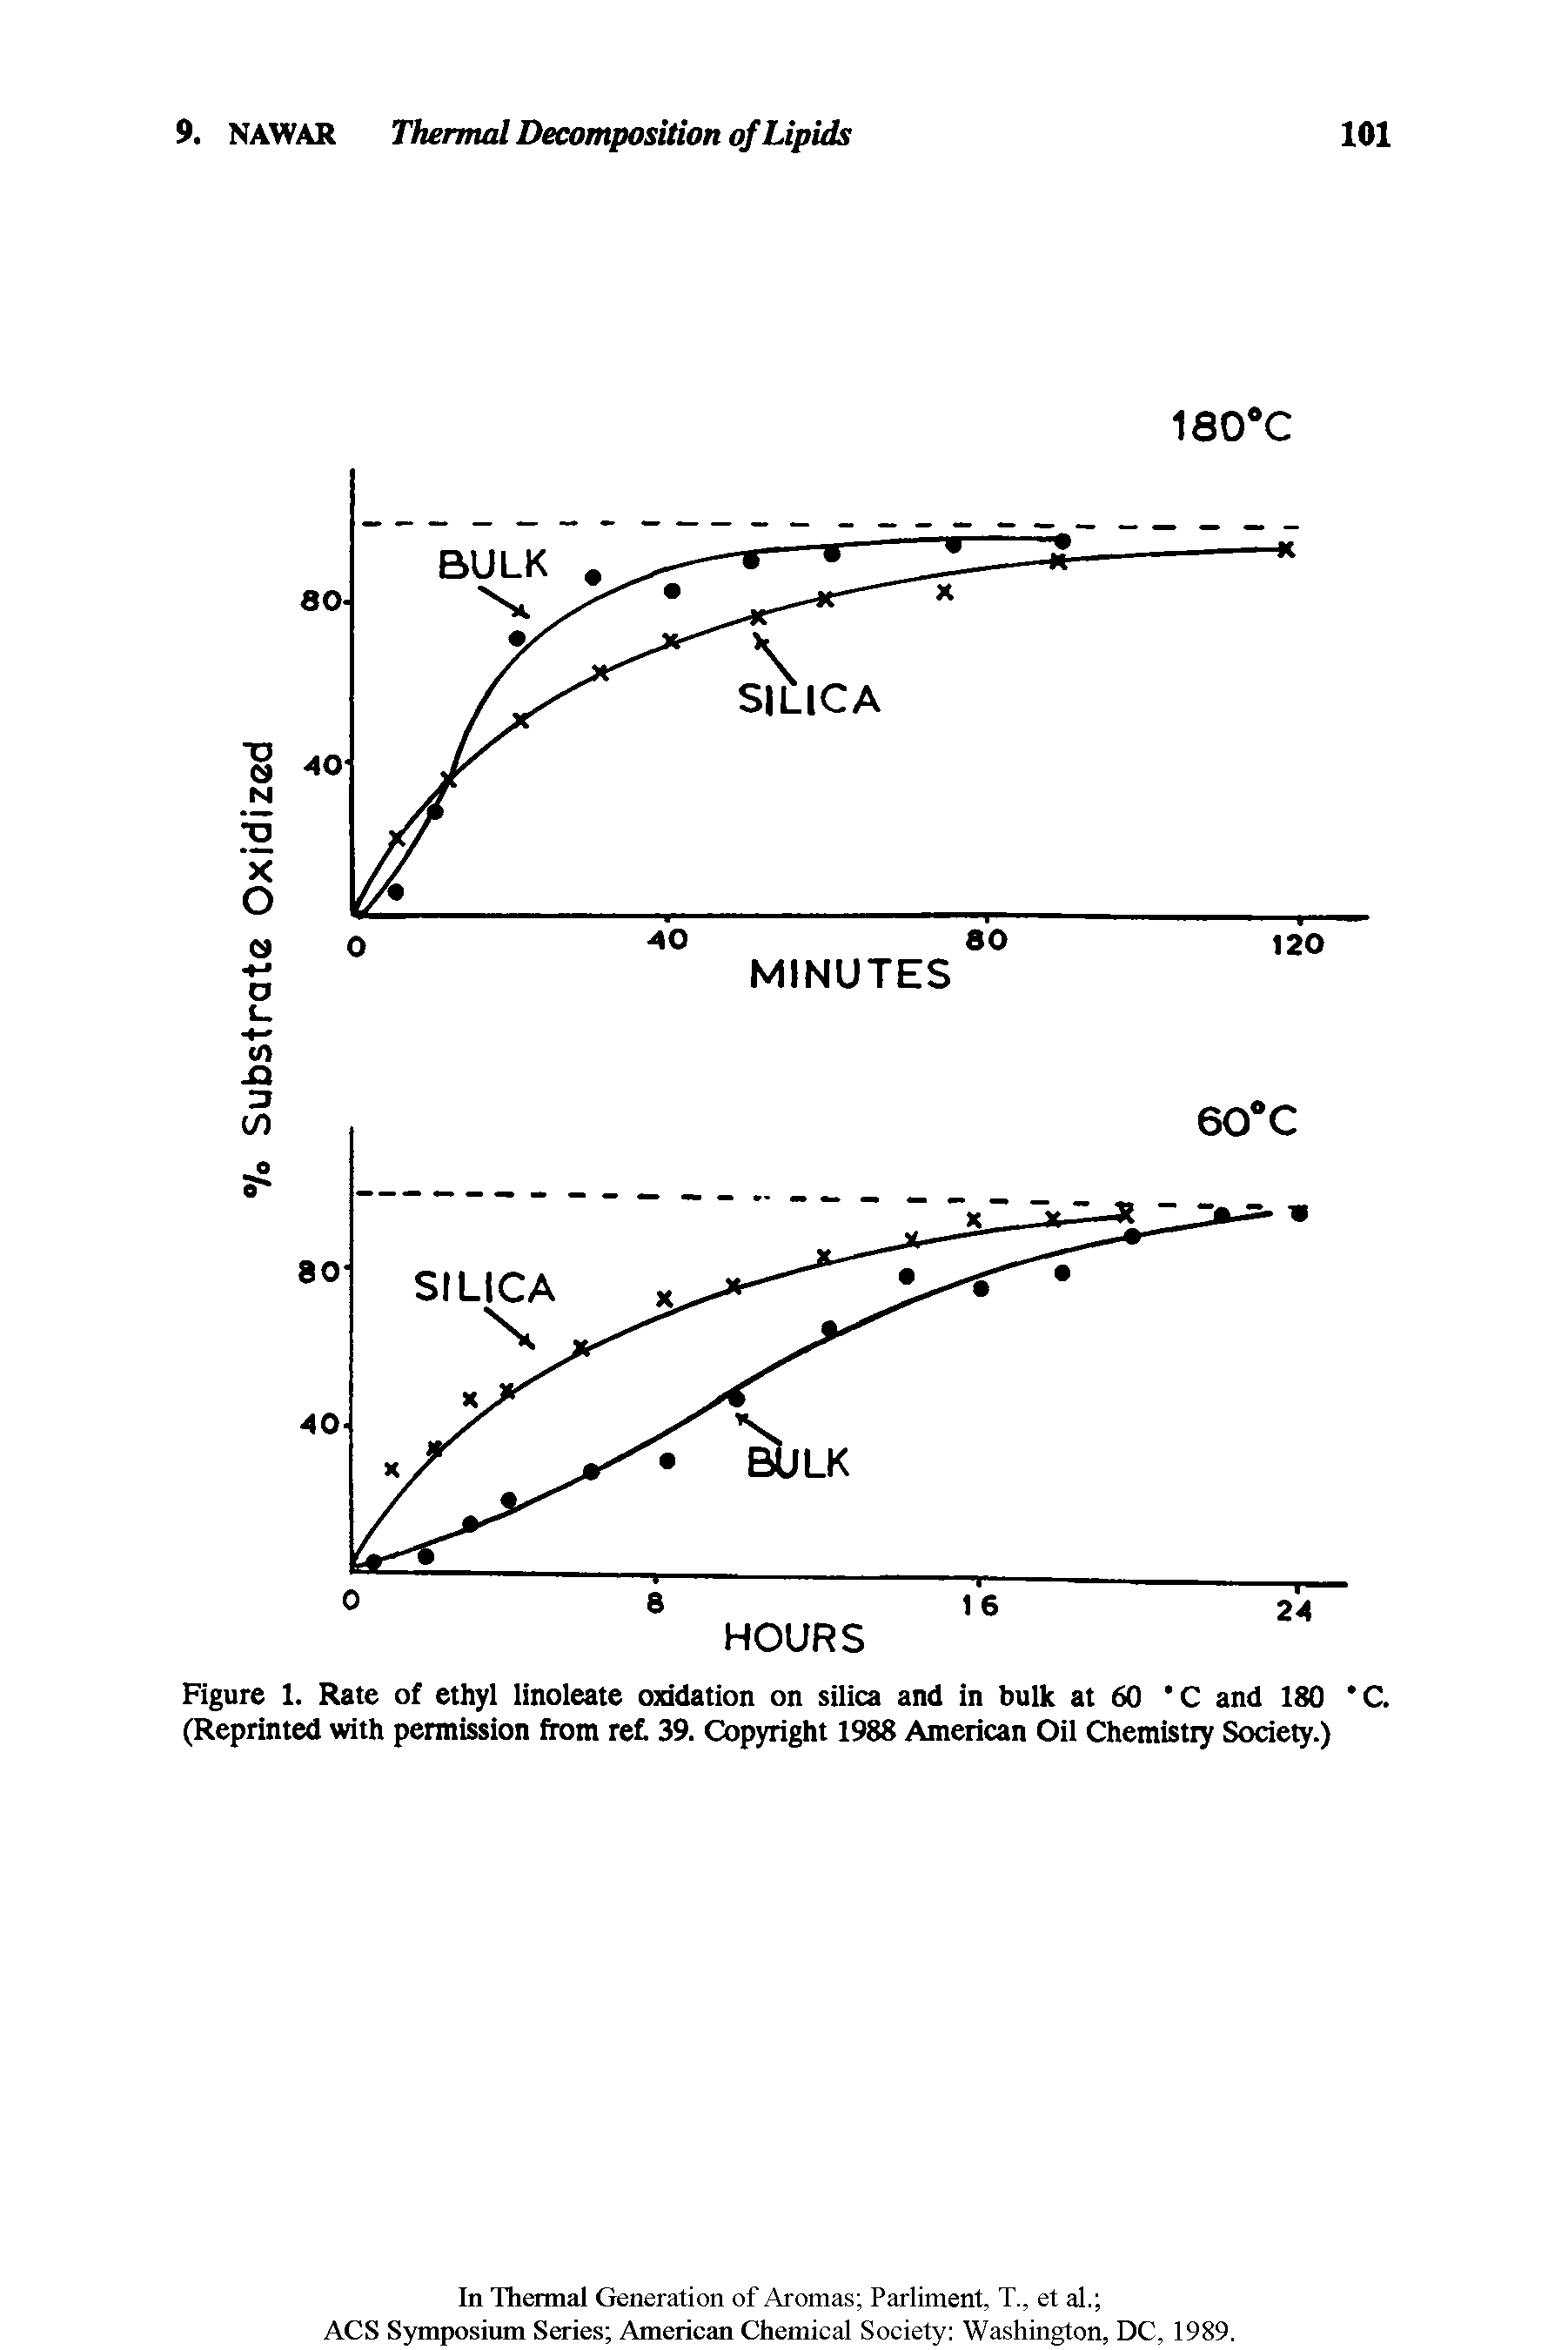 Figure 1. Rate of ethyl linoleate oxidation on silica and in bulk at 60 C and 180 C. (Reprinted with permission from ref. 39. Copyright 1988 American Oil Chemistry Society.)...